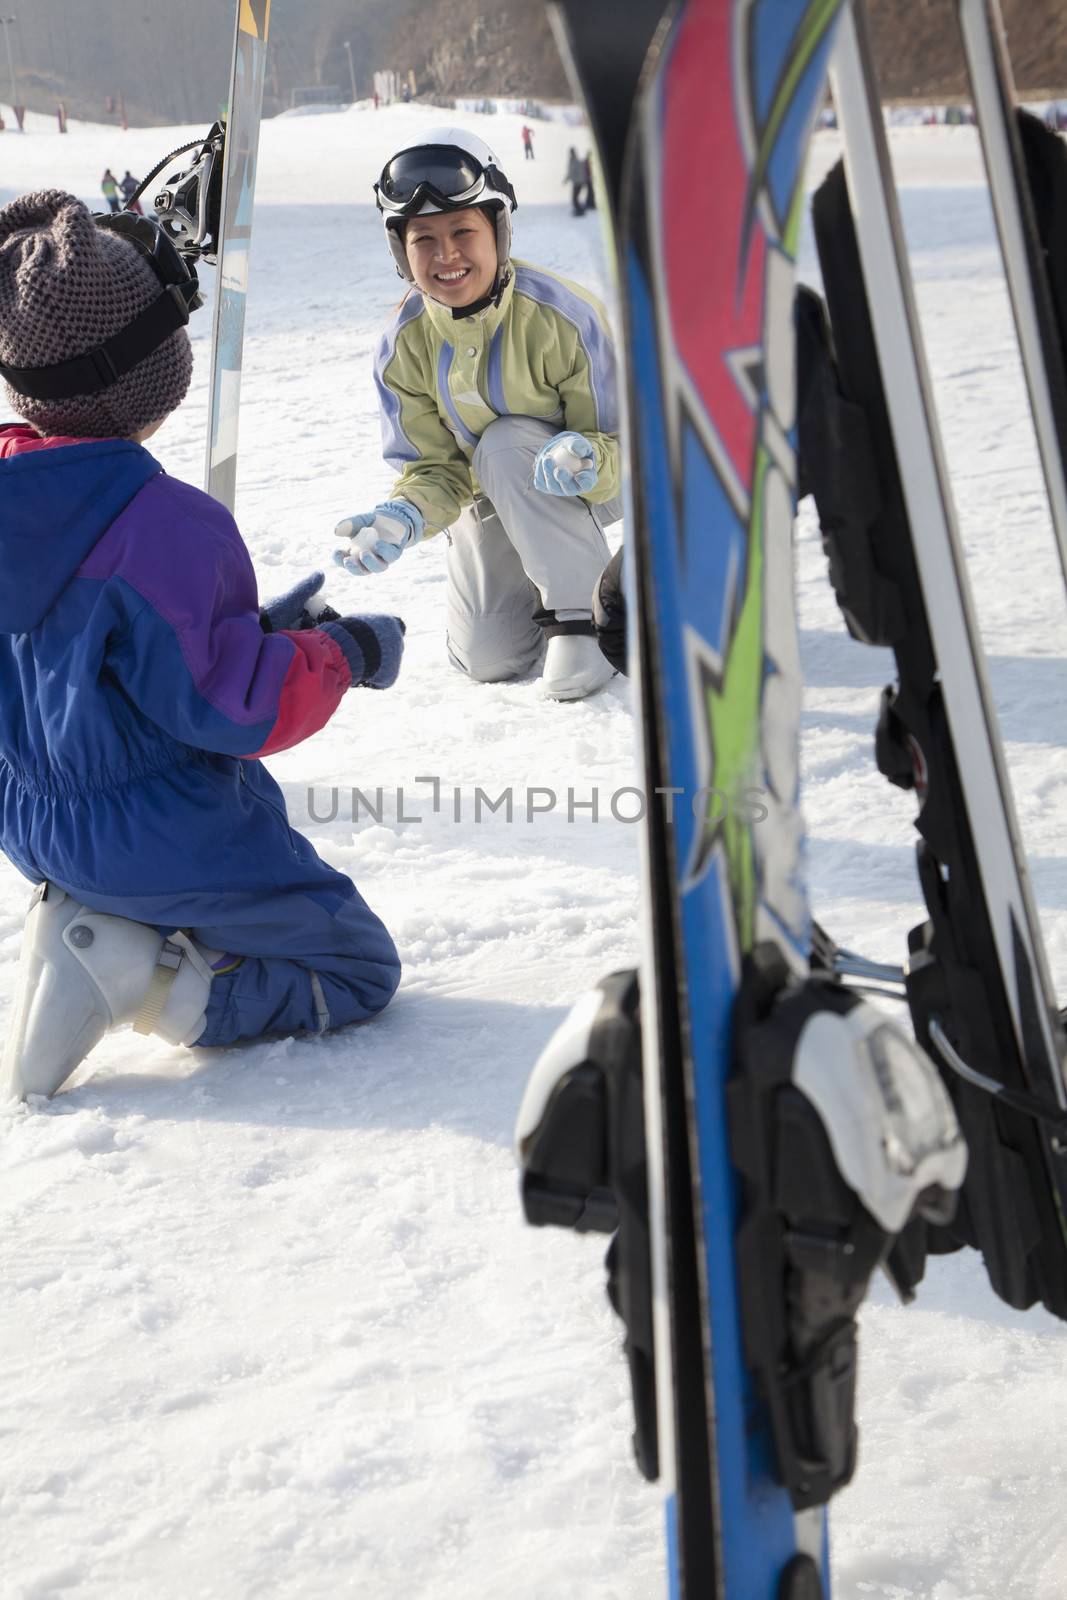 Smiling Family with Ski Gear in Ski Resort by XiXinXing